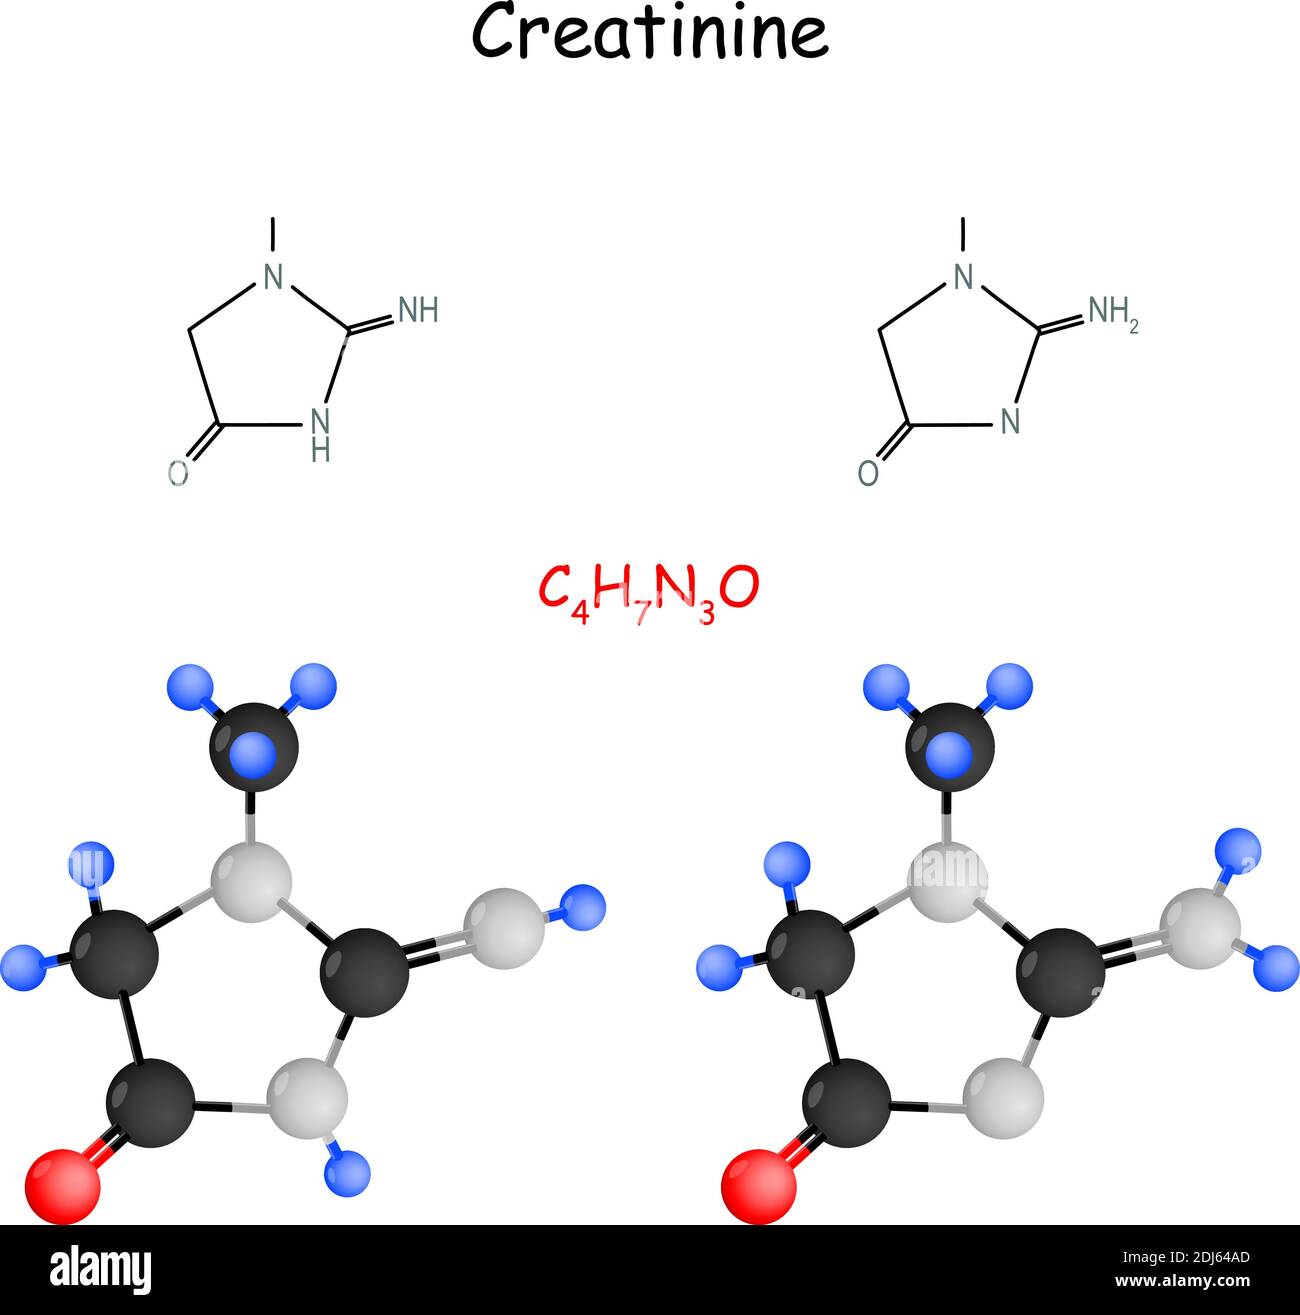 Creatinine. Chemical structural formula and model of molecule. Vector Illustration Stock Vector